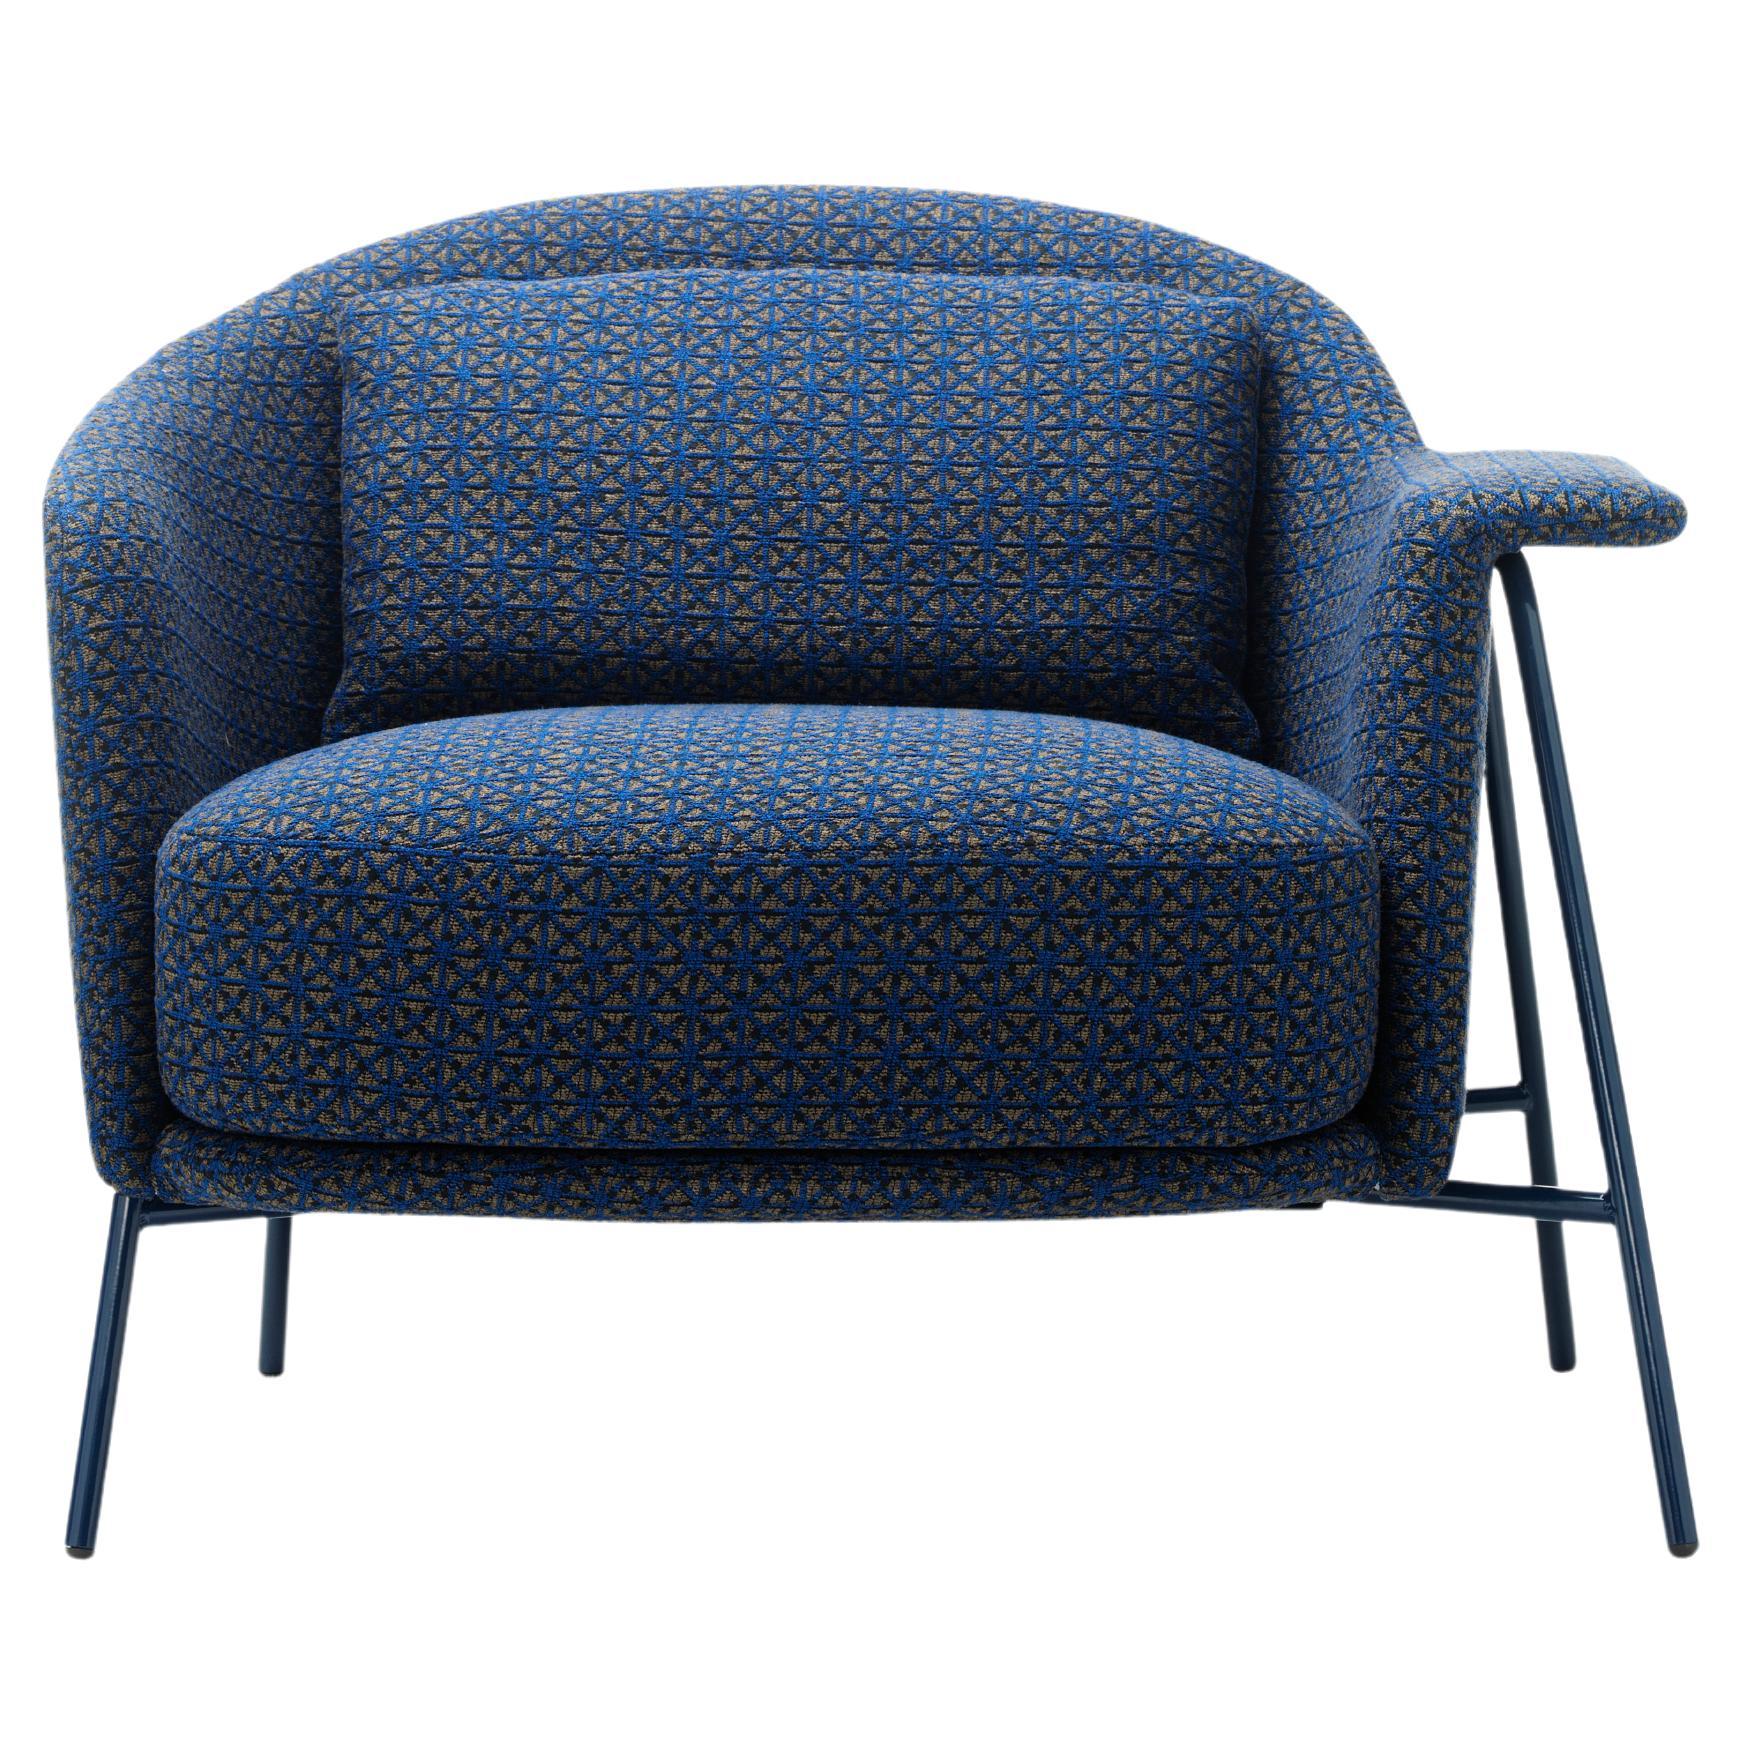 Kepi Armchair in Diplo Blue Upholstery with Blue Metal Feet by Emilio Nanni For Sale